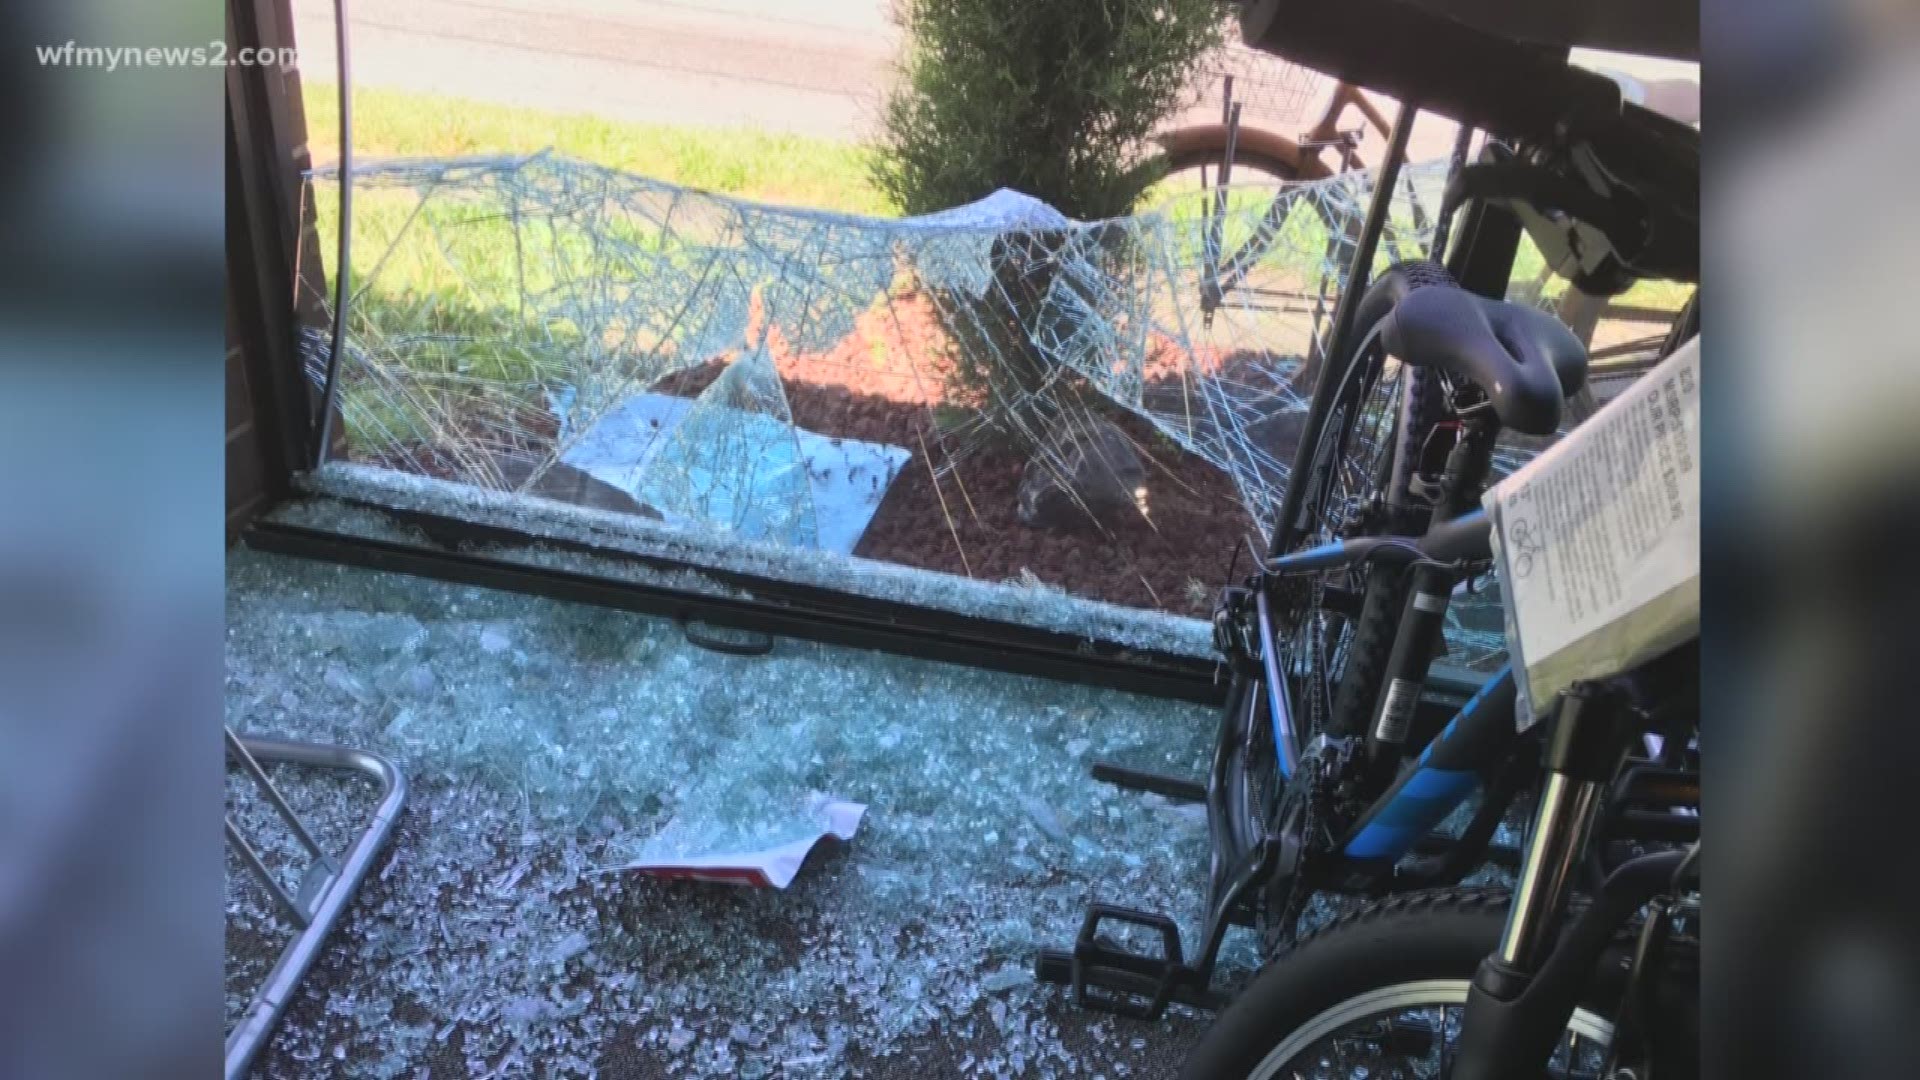 Someone used a huge rock to smash through the glass wall of a popular bike shop in High Point.